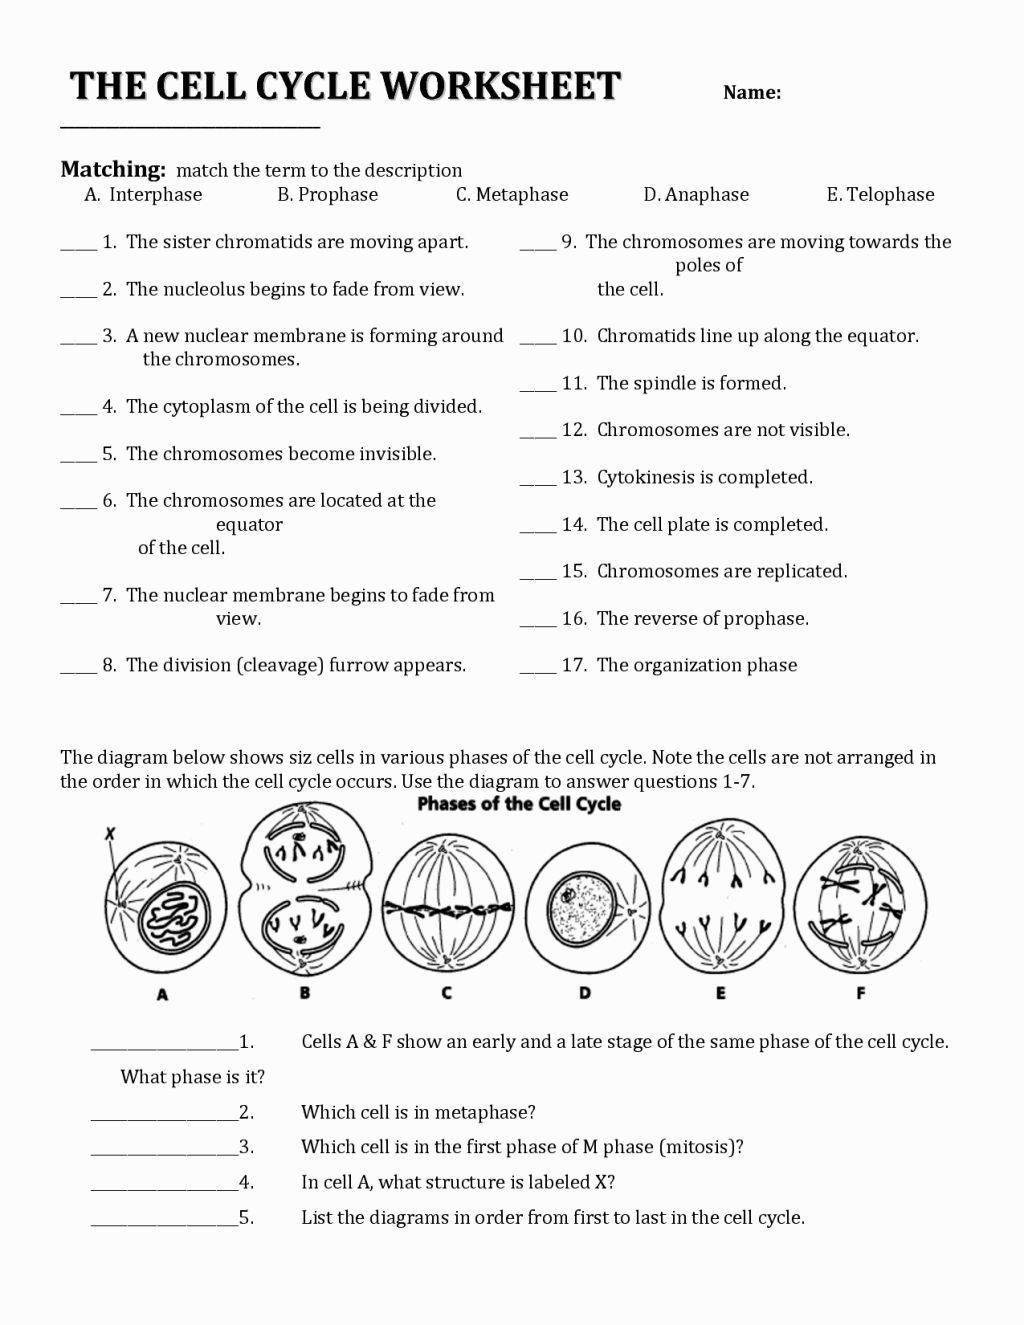 Cell Cycle Worksheet Answers the Cell Cycle Coloring Worksheet Key